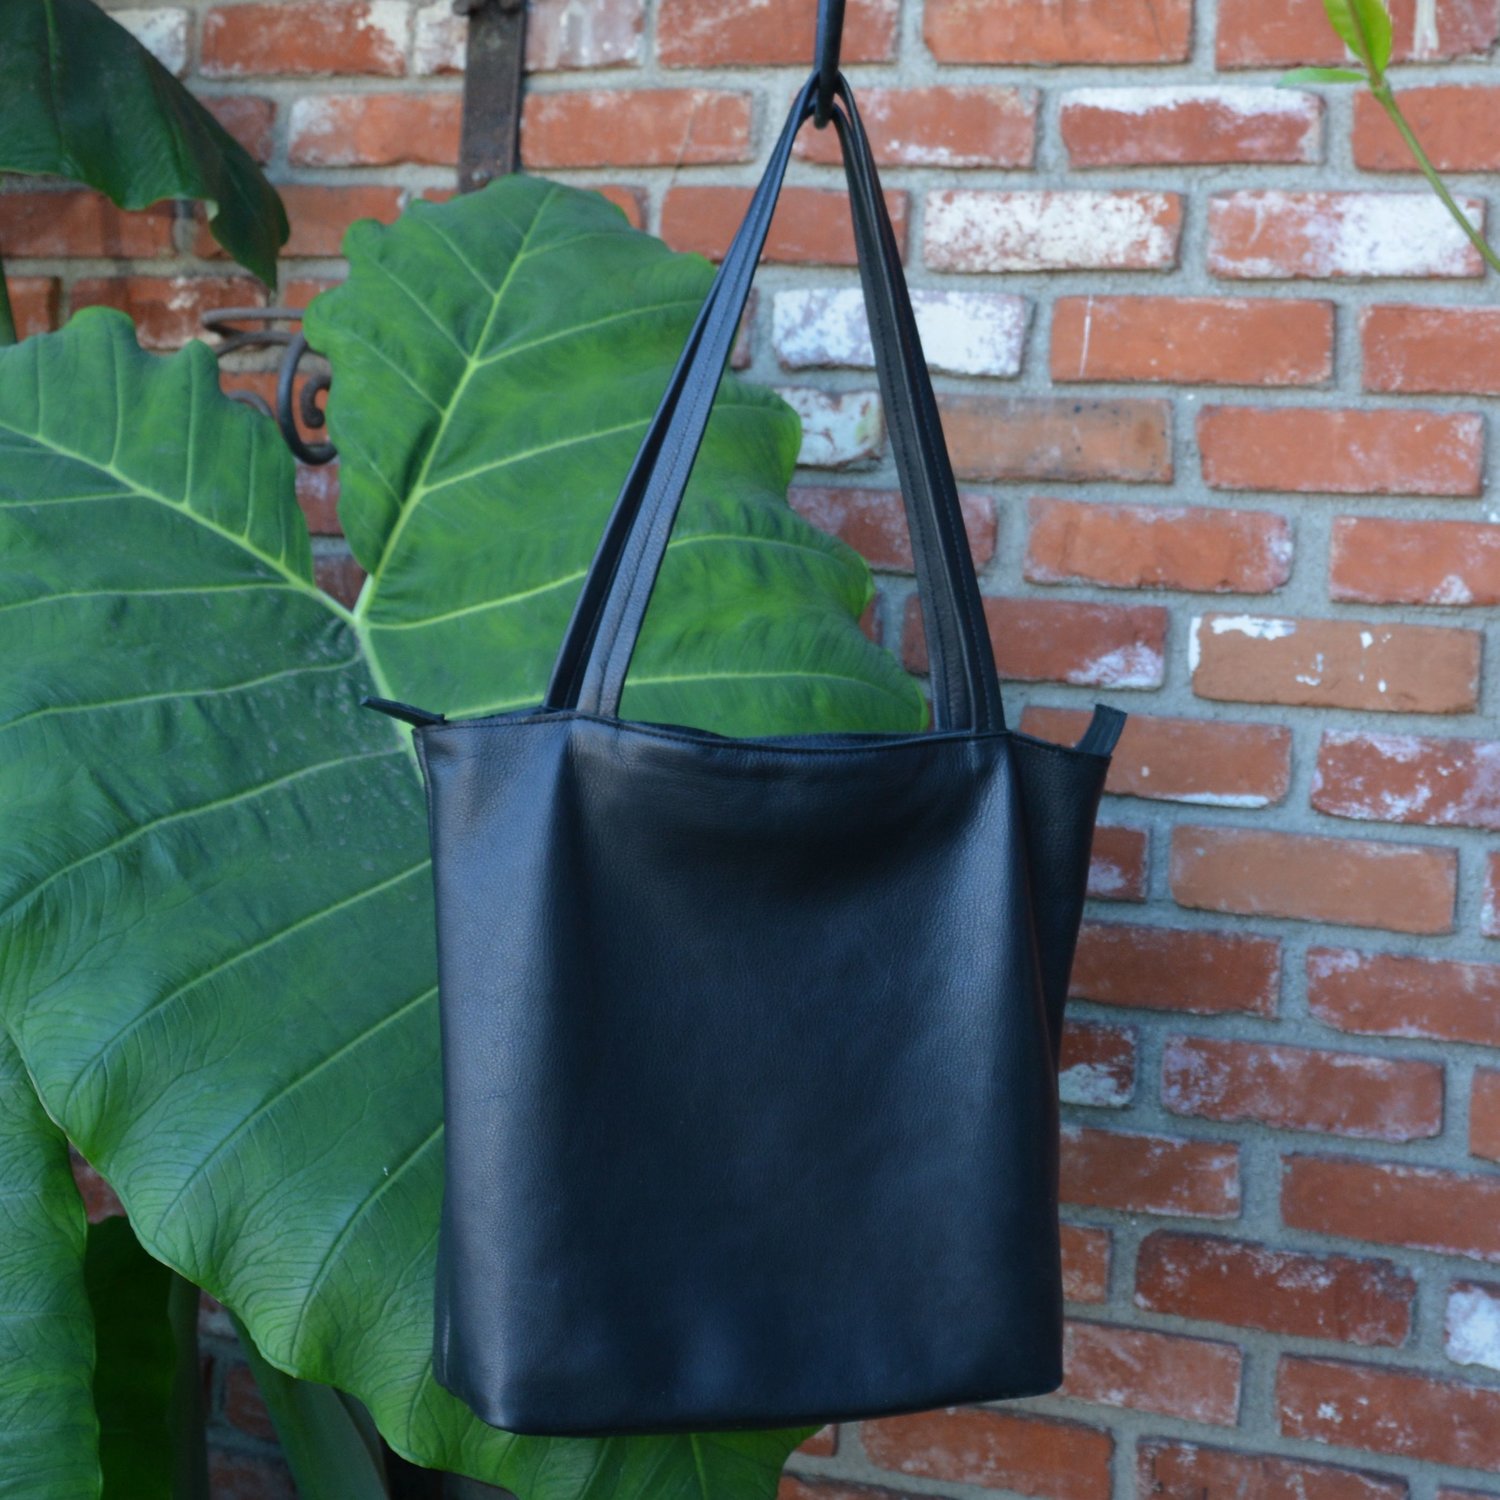 zip leather tote